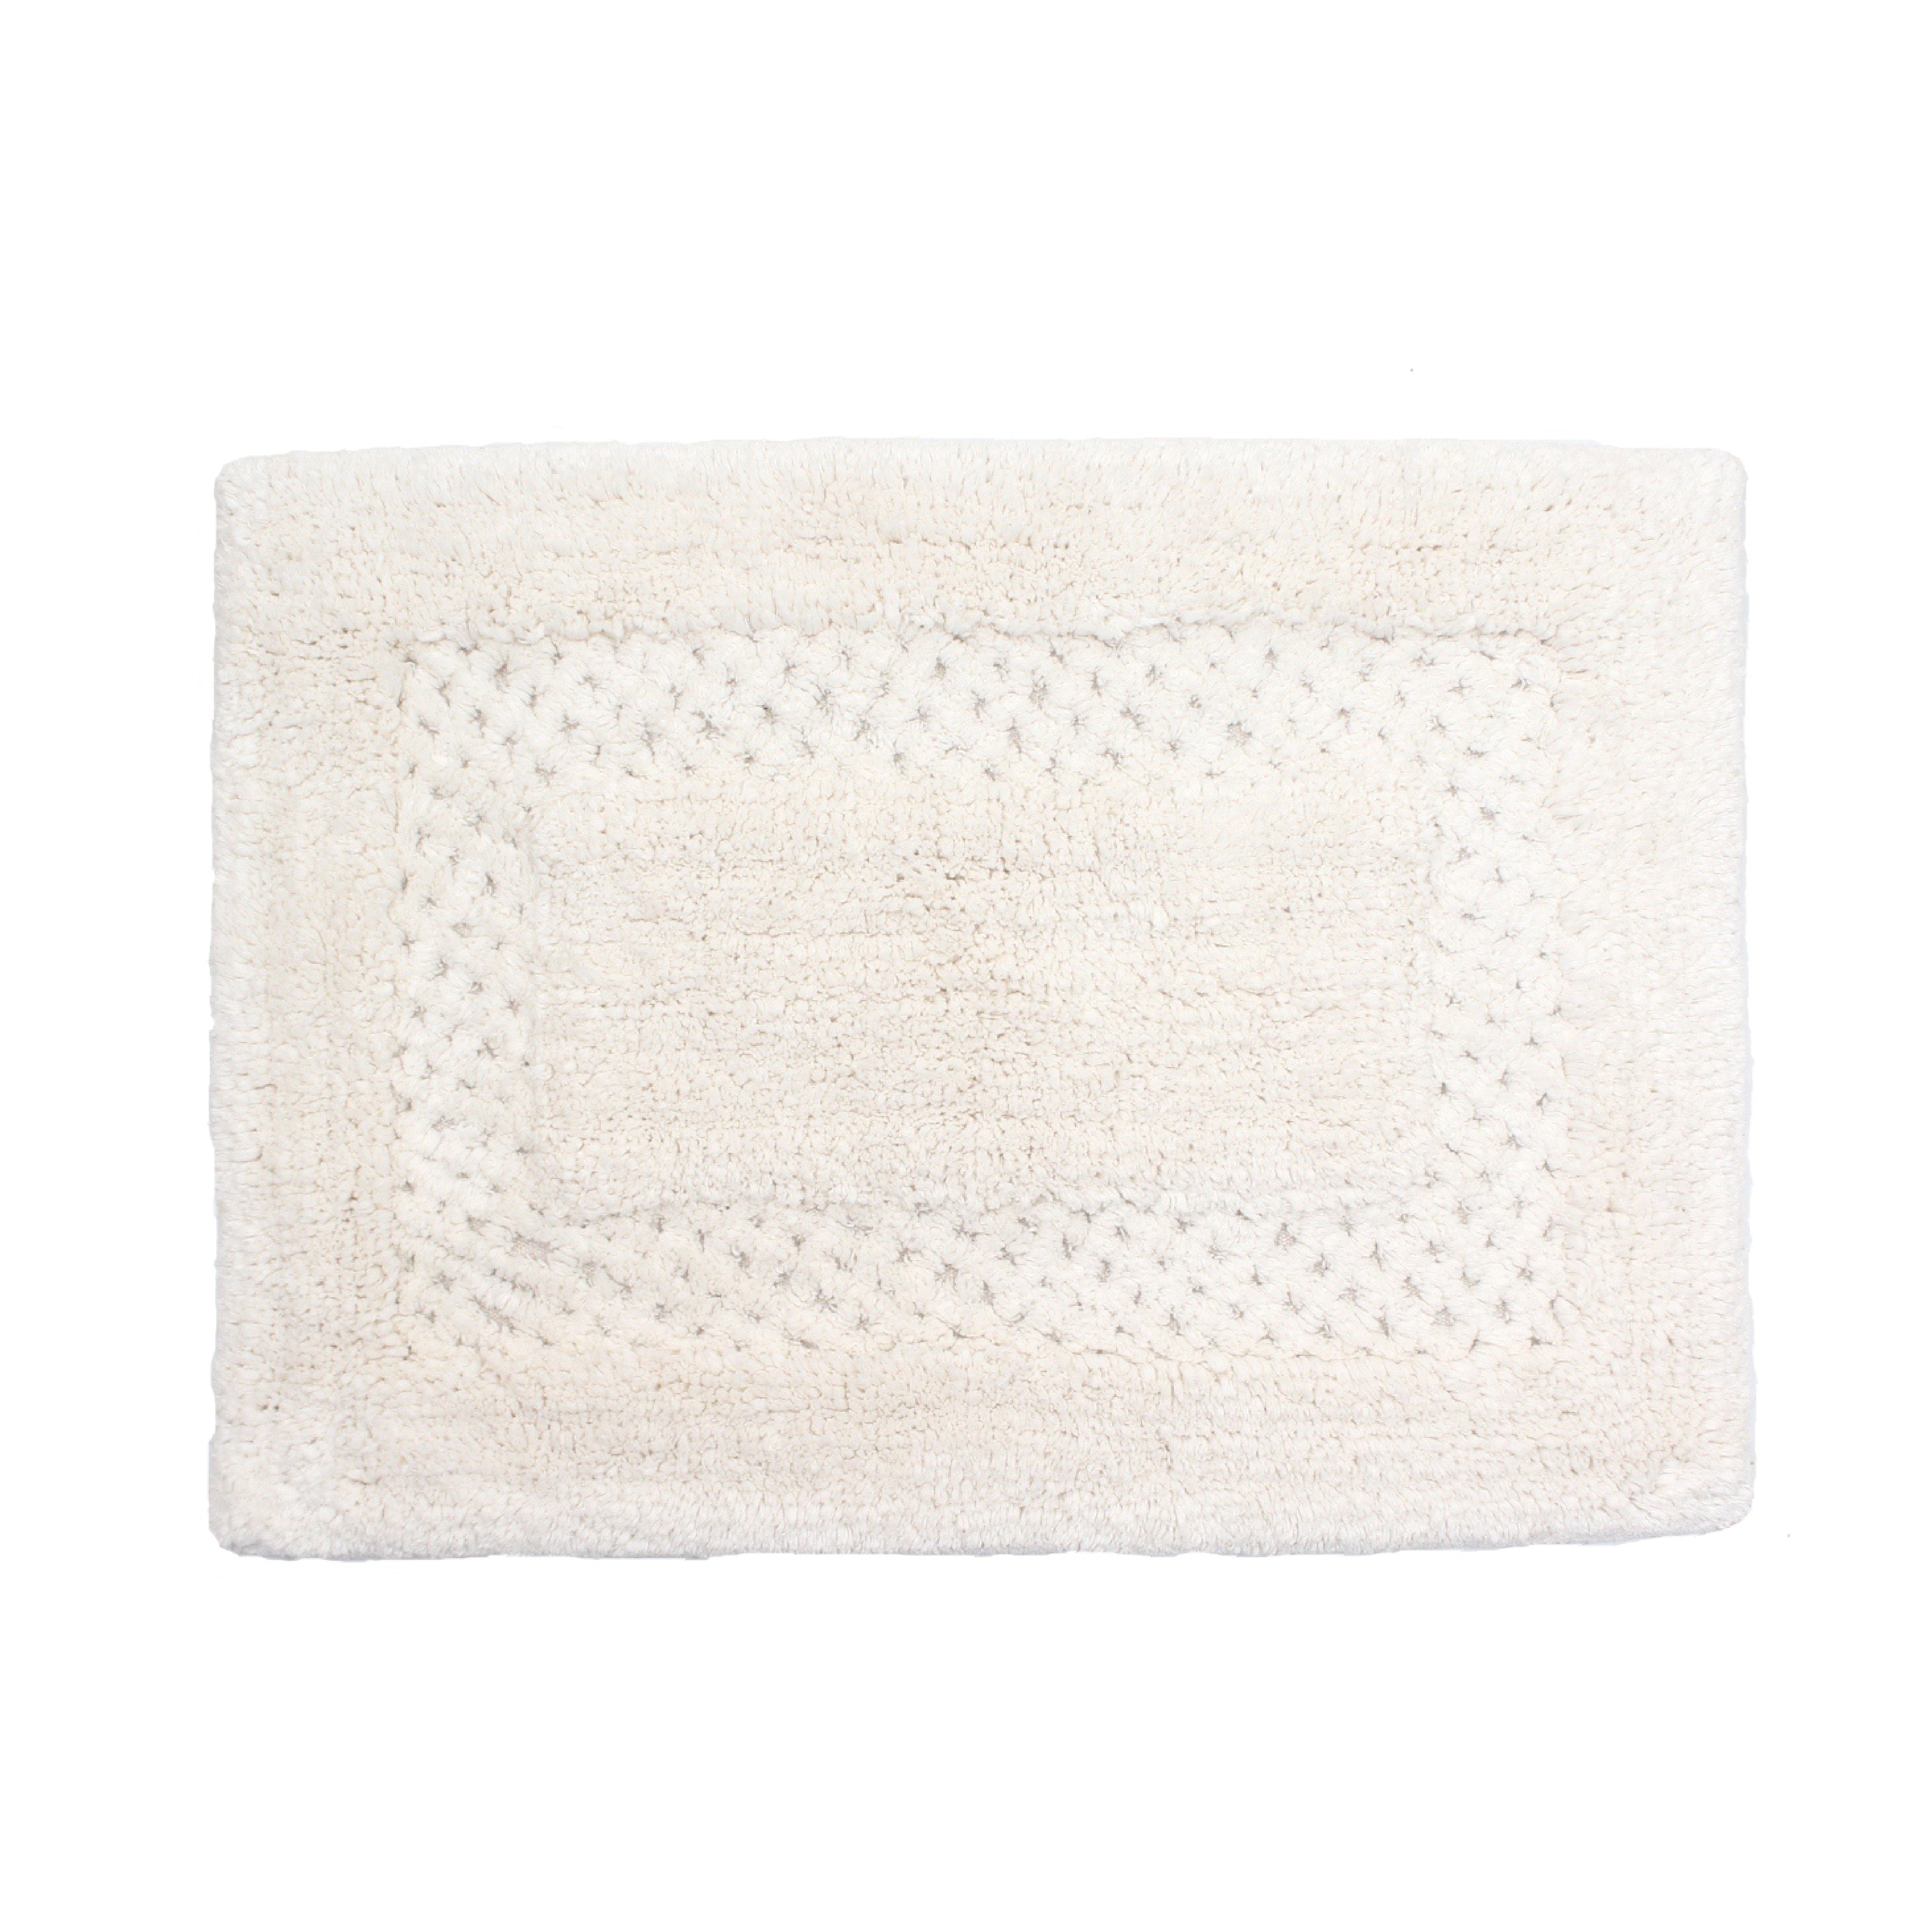 https://ak1.ostkcdn.com/images/products/is/images/direct/11005600b5da22bfdfa53dfb21b40ad20f87ae2d/Classy-Bathmat-Collection---Absorbent-Cotton-Soft-Bath-Rug%2C-Machine-Washable.jpg